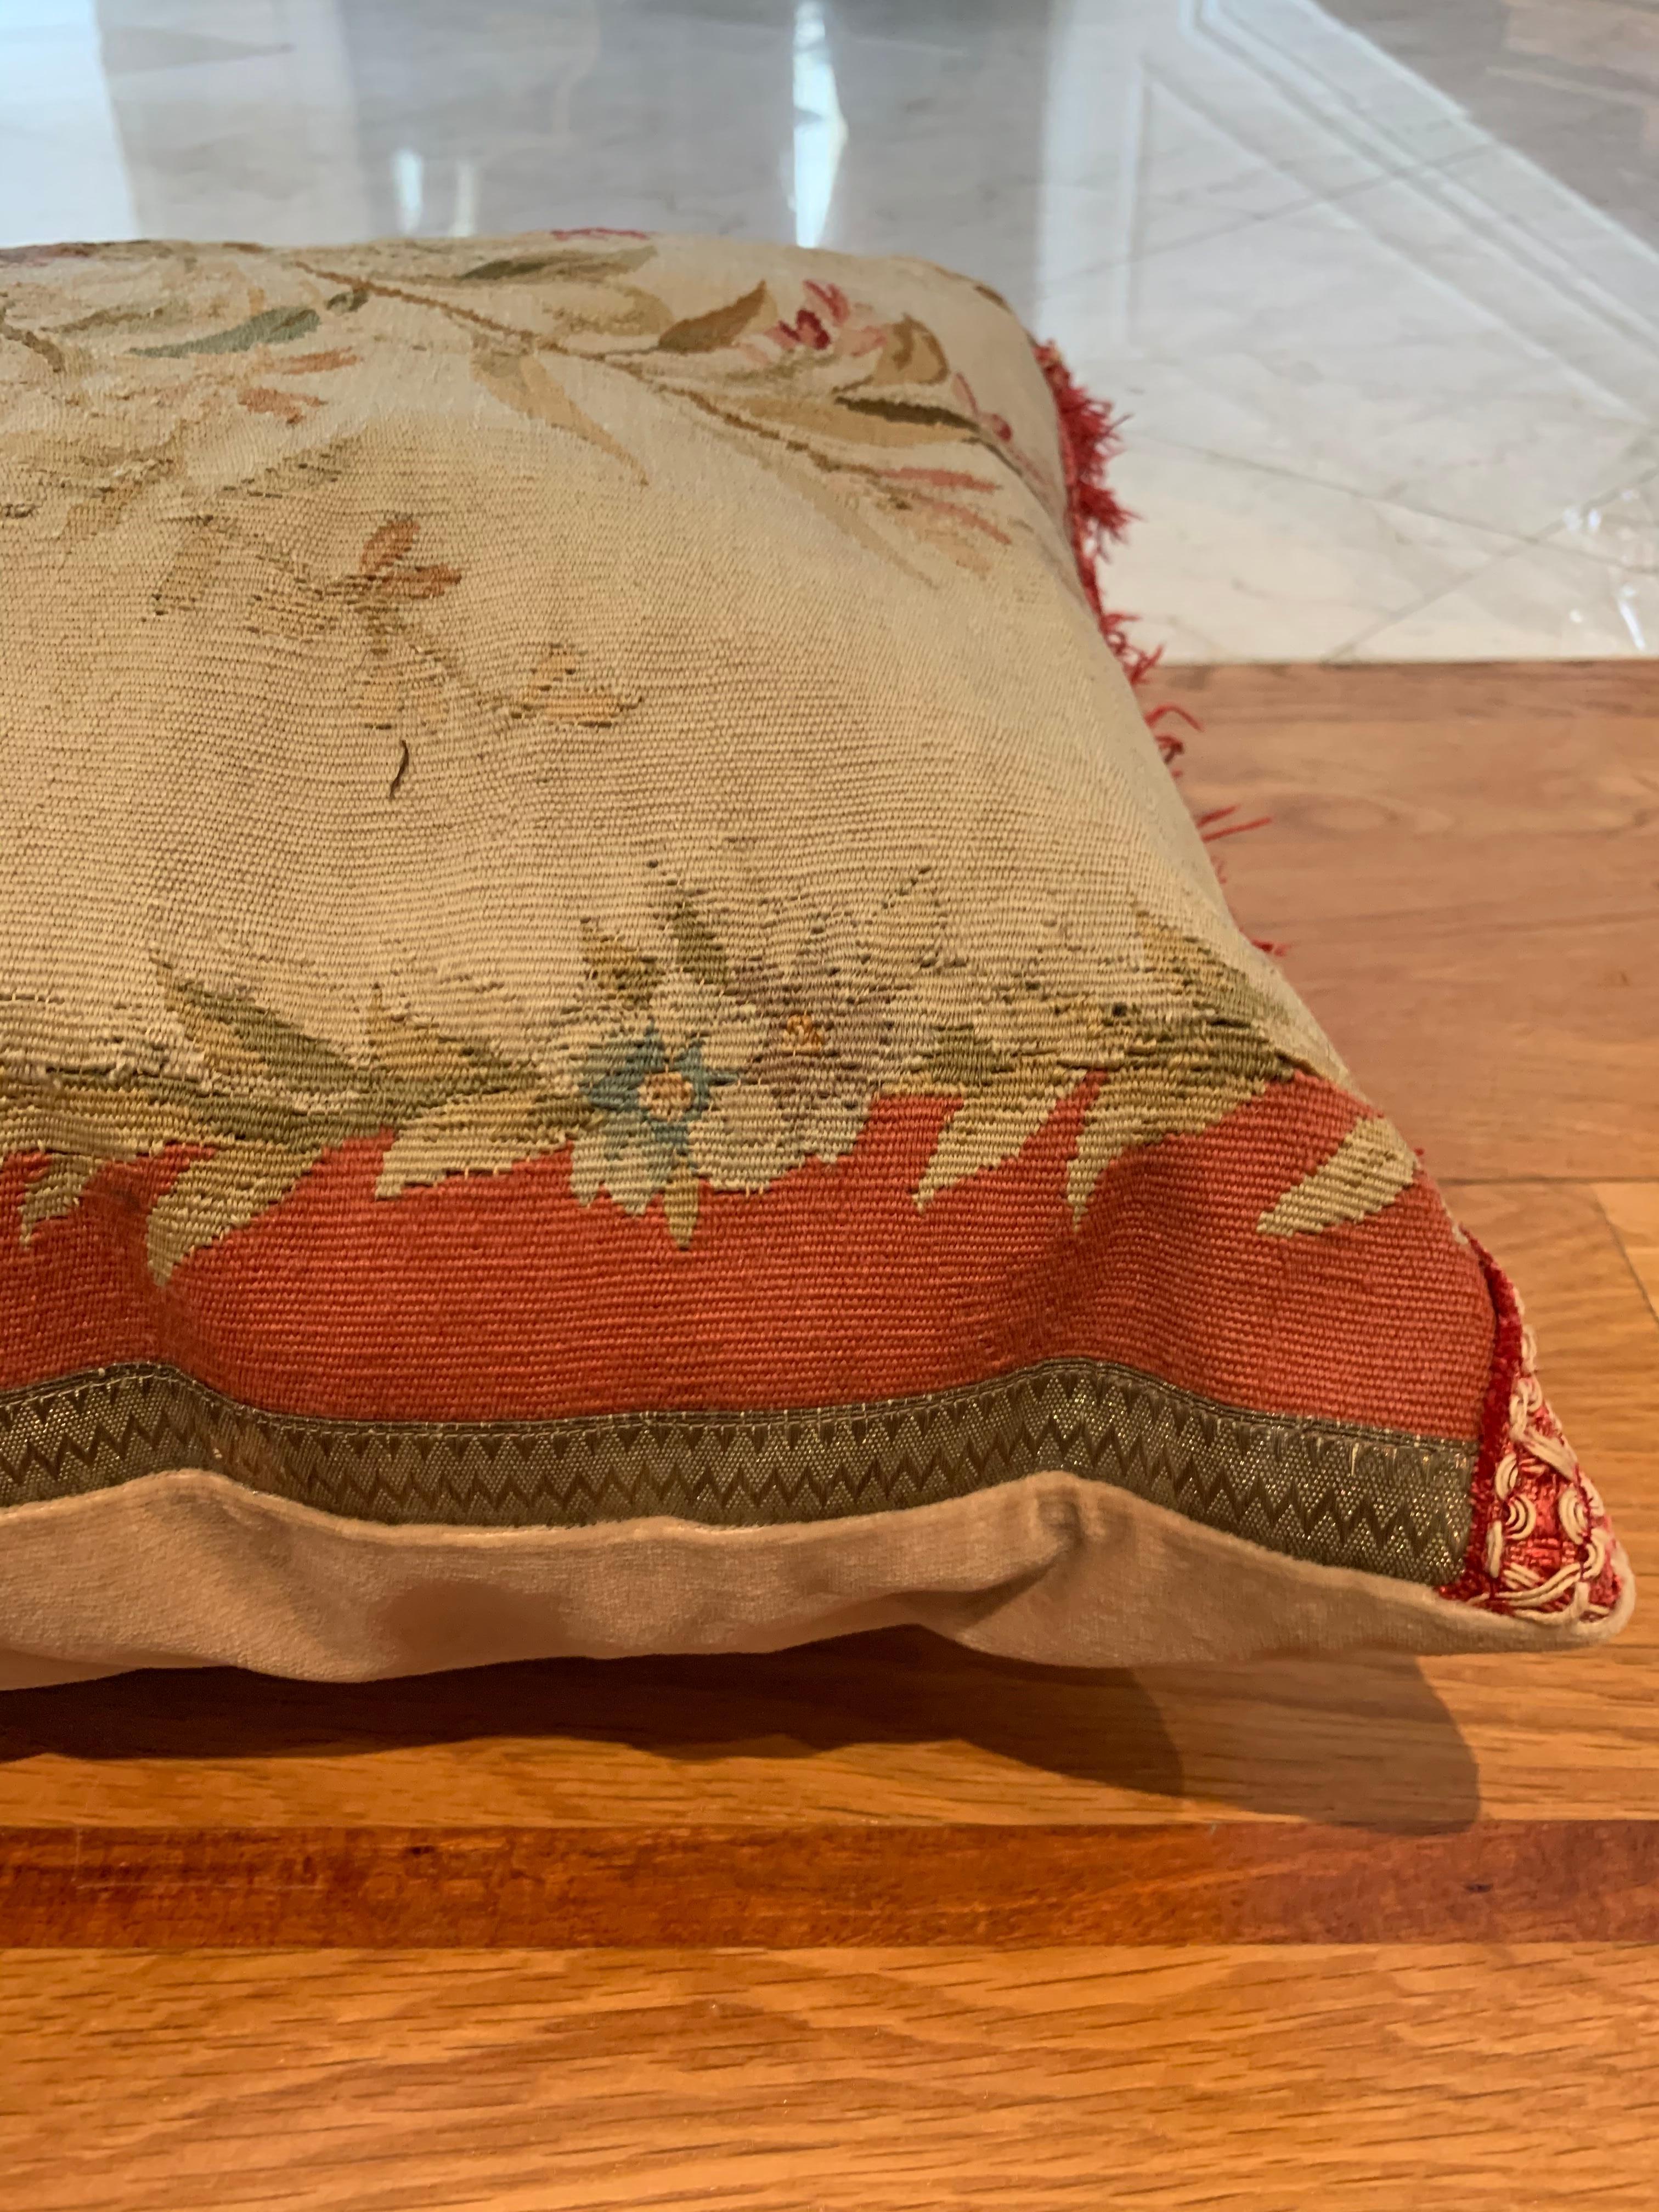 Hand-Woven Antique 19th Century French Aubusson Tapestry Lumbar Pillow with Flowers